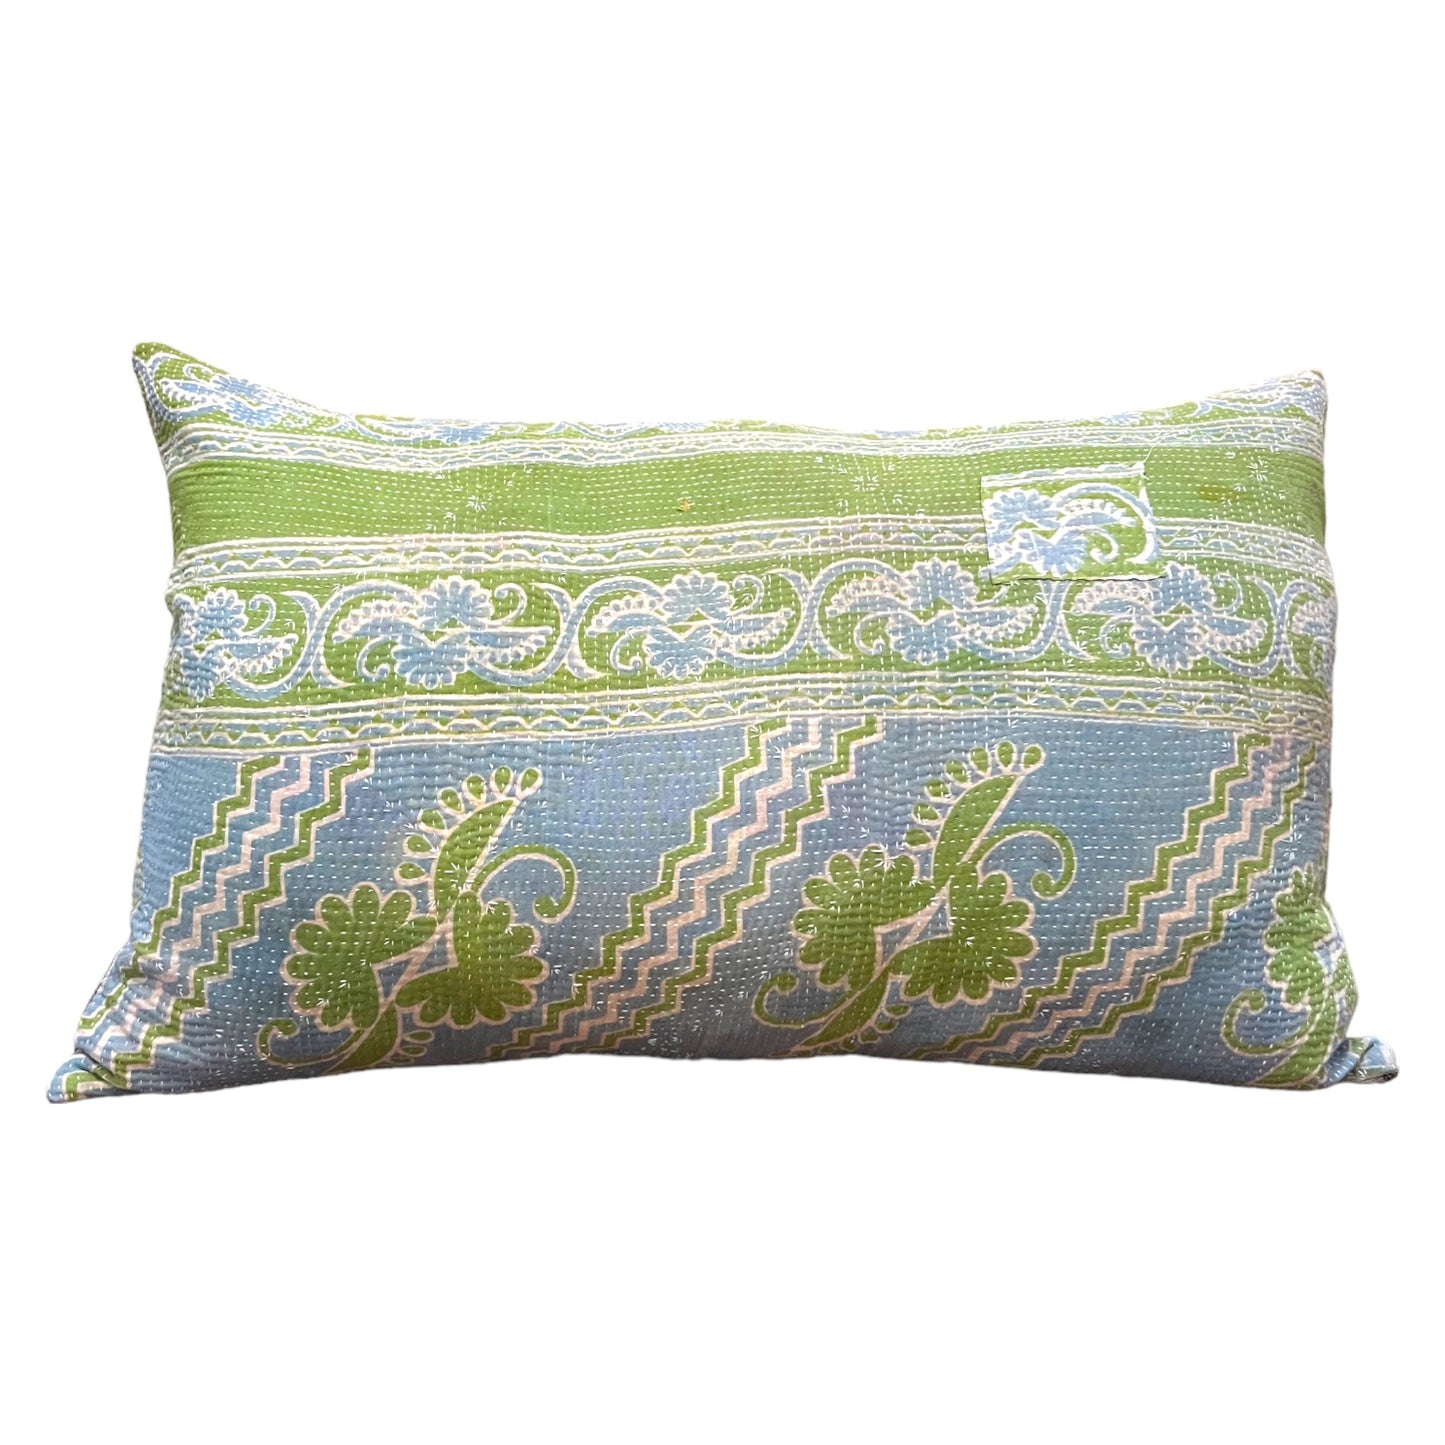 Green and blue kantha cushion rectangle